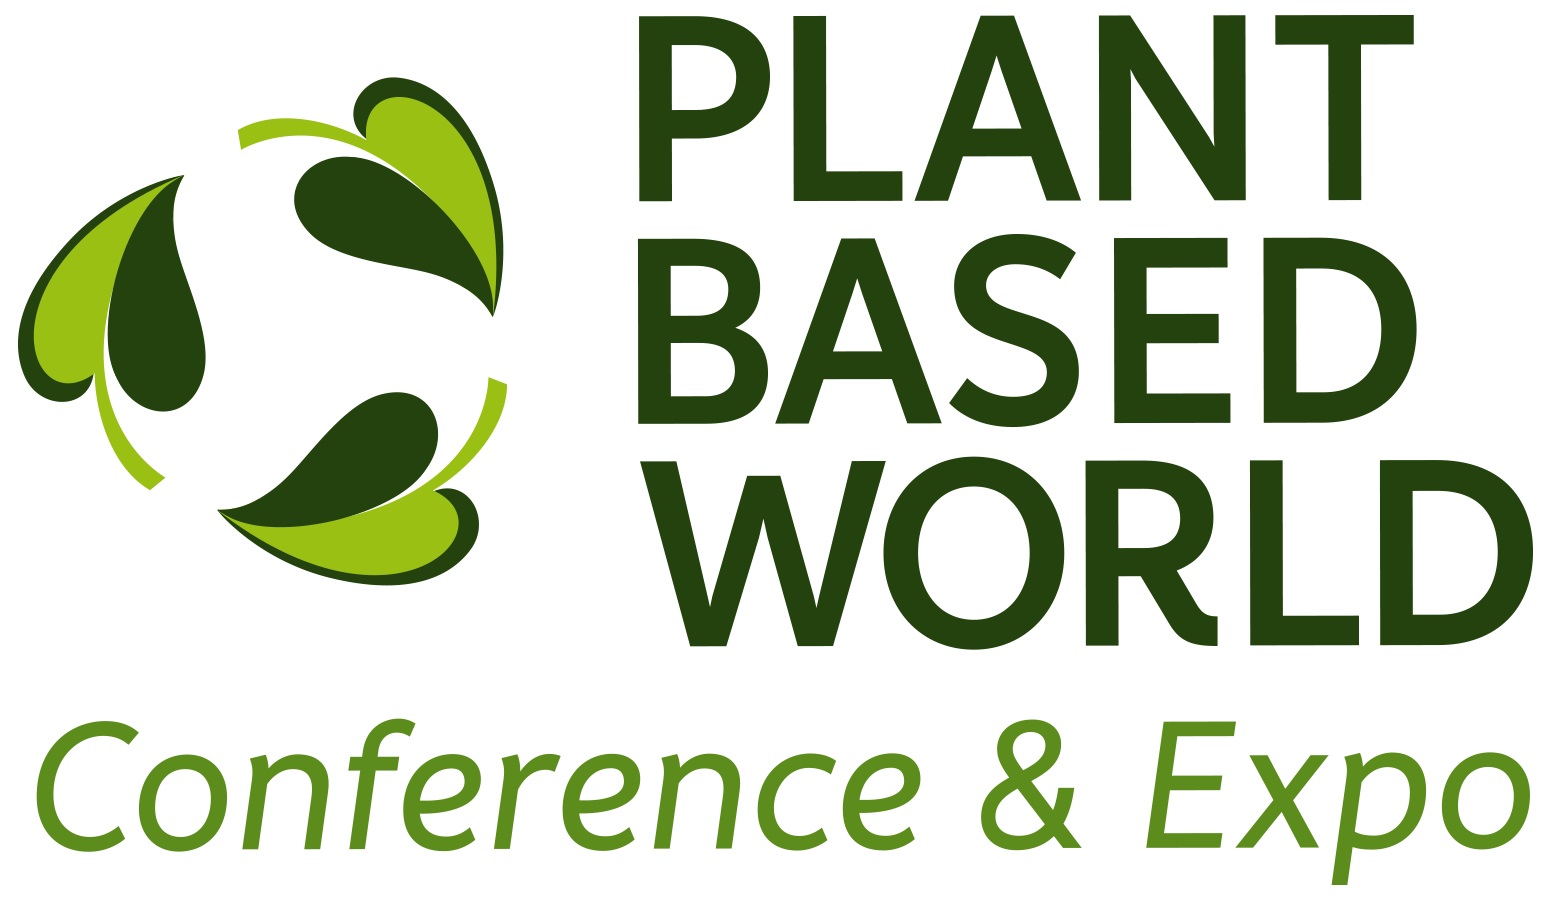 Plant Based World Conference & Expo Is Set To Bring The PlantBased